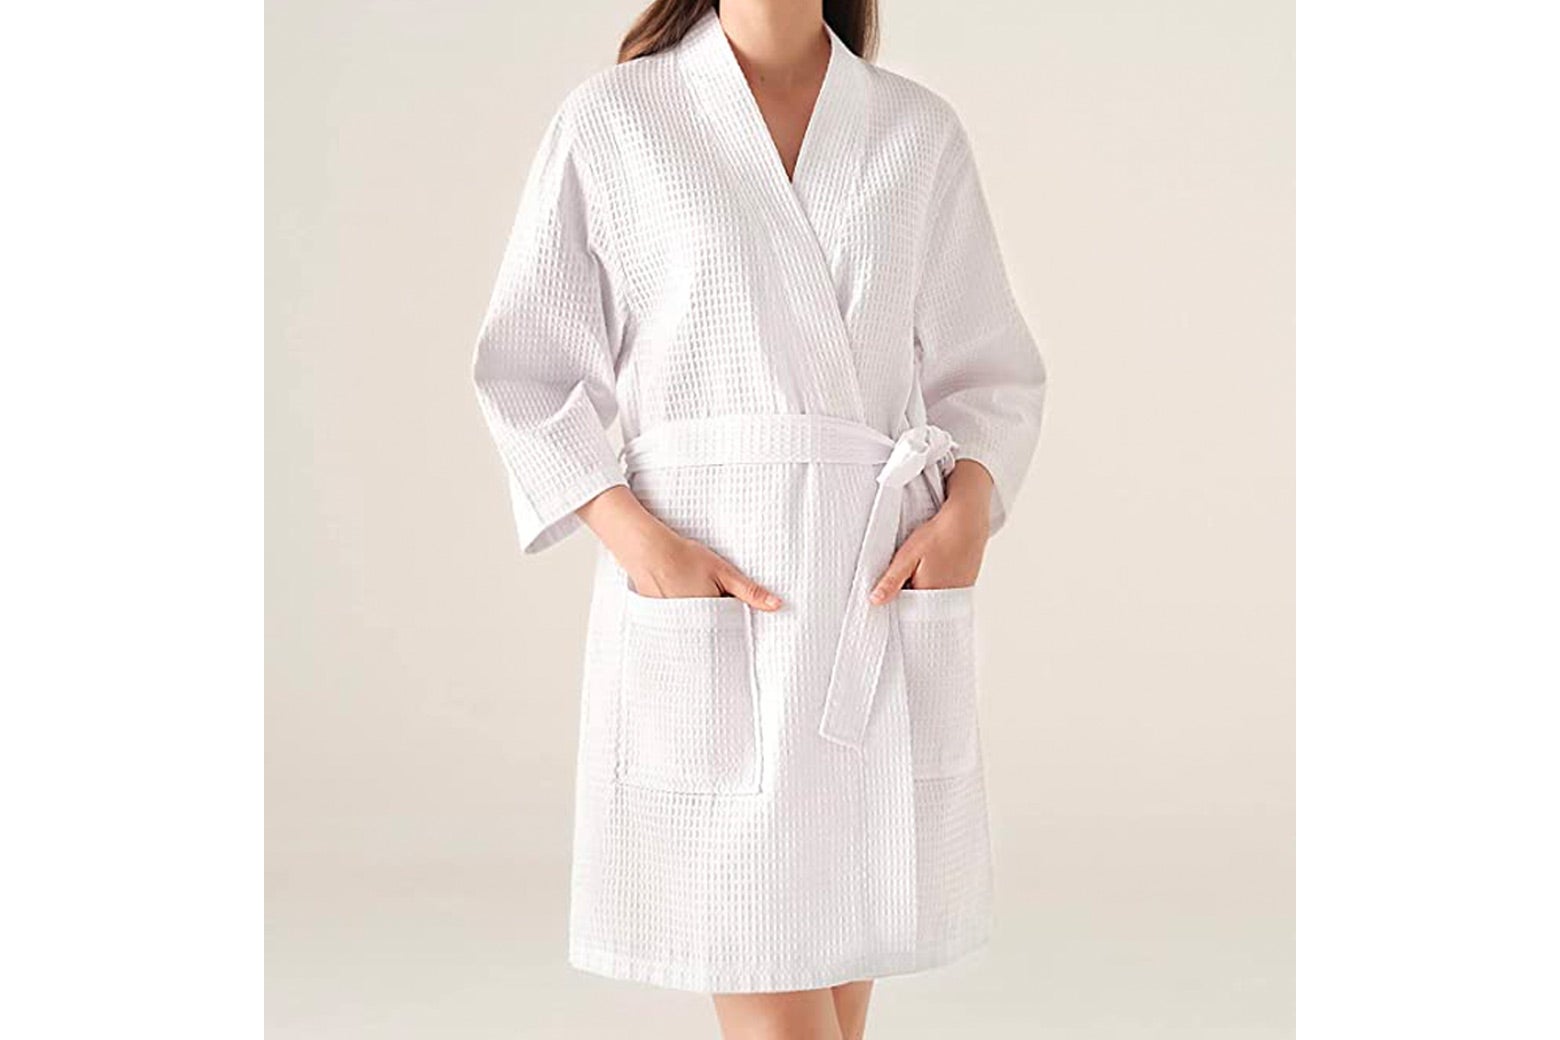 A woman wears a white waffle robe and puts her hands in the front pockets.